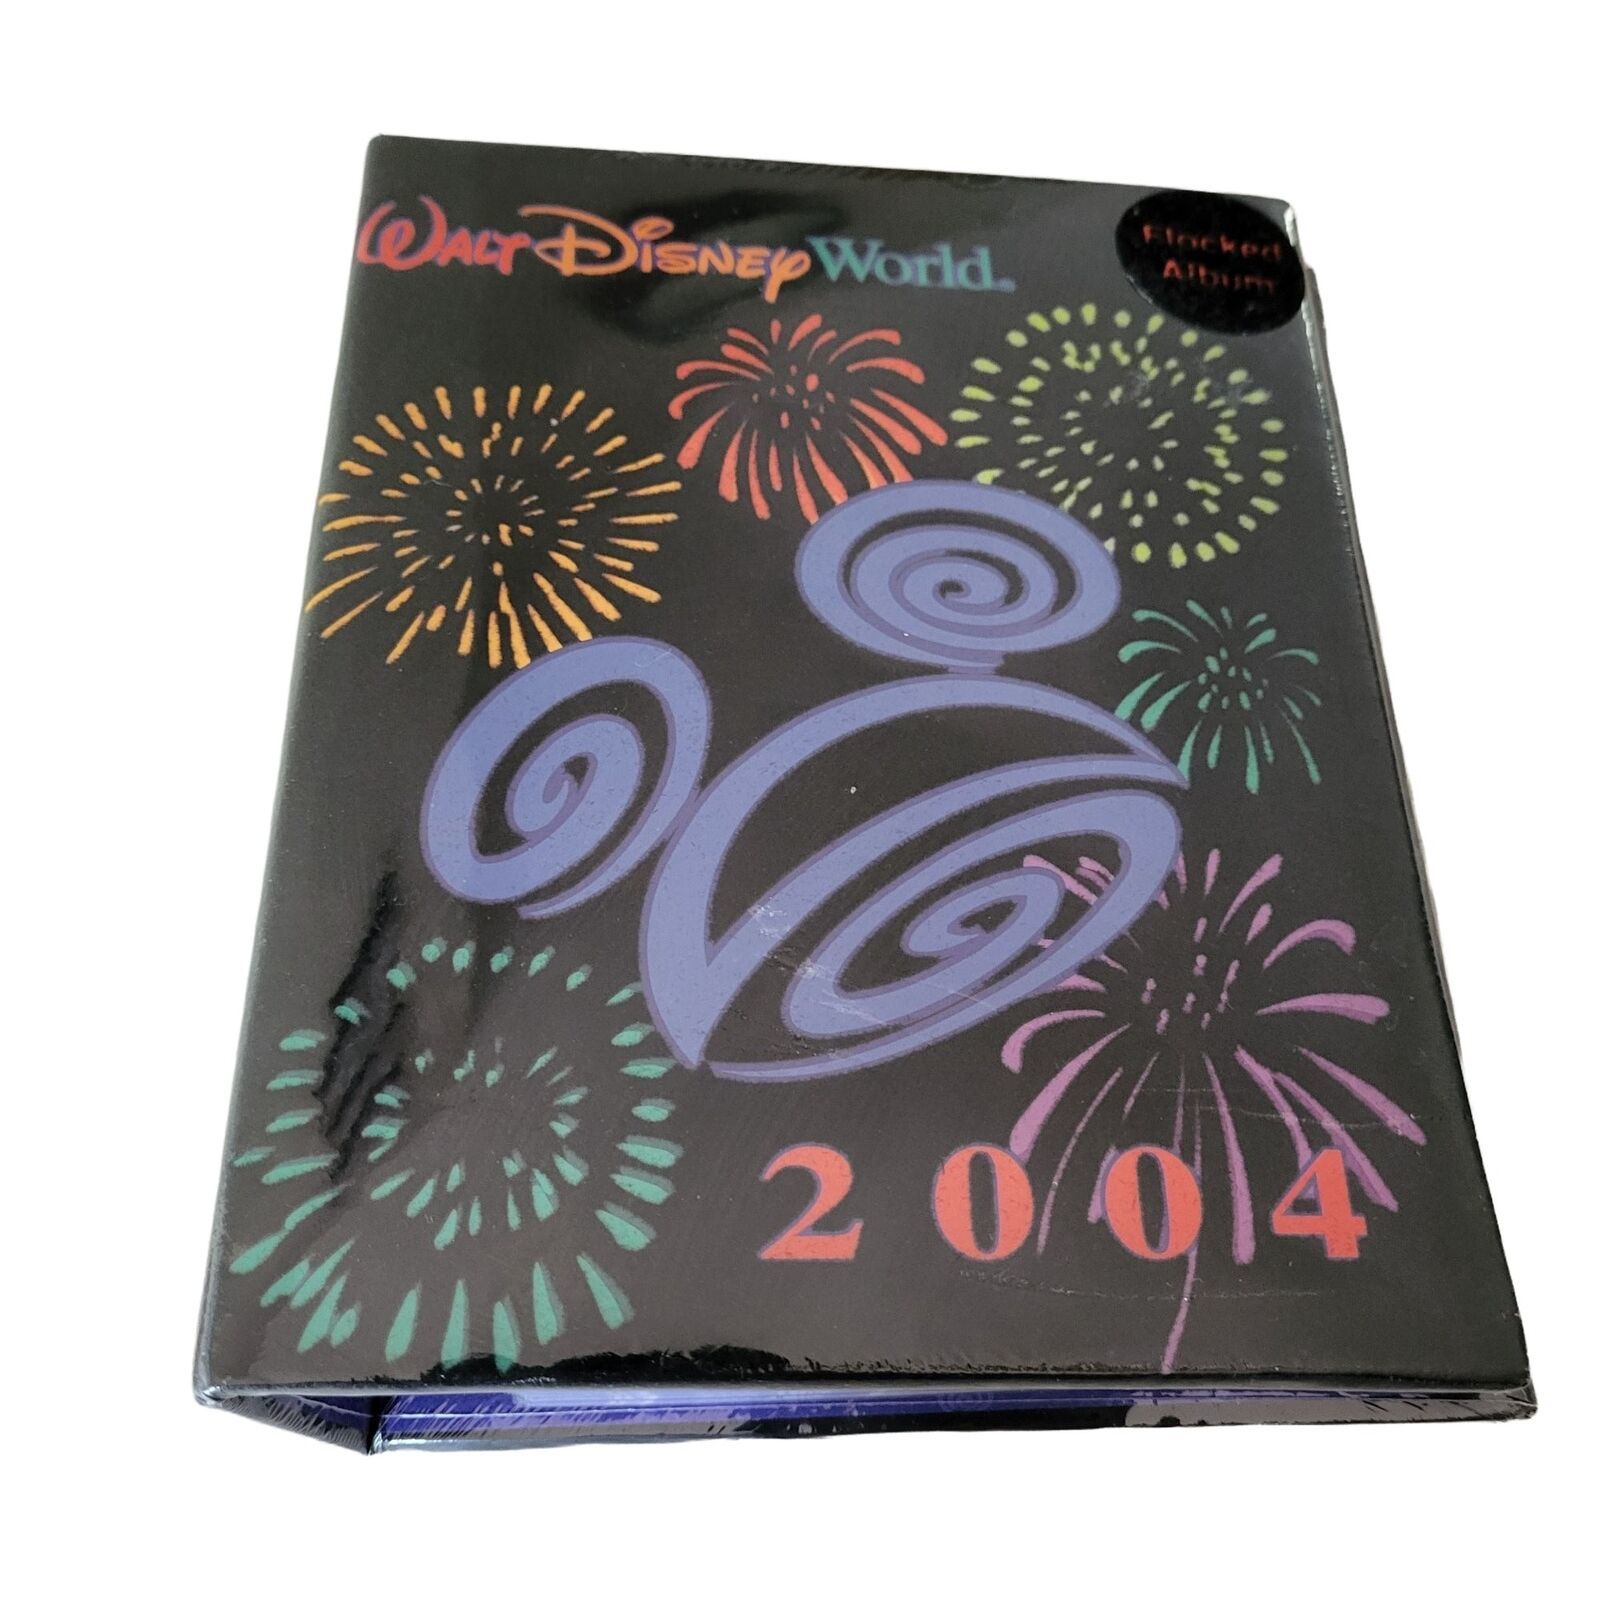 Walt Disney World Photo Album 2004 Flocked 50 pages Holds 100 4 x 6 in Pictures - $22.53